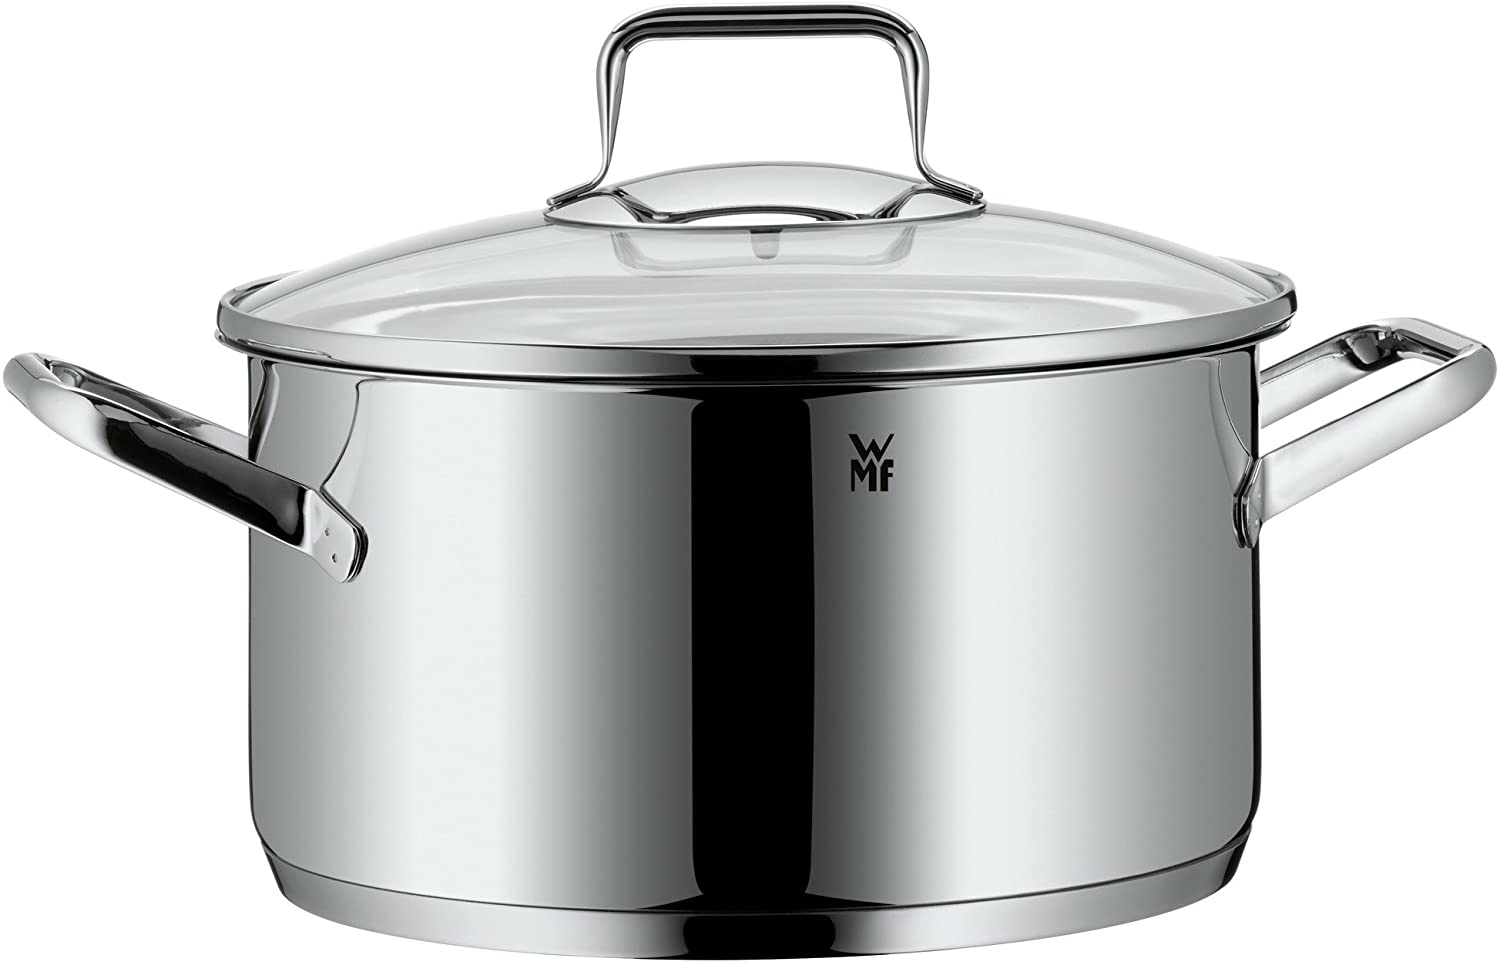 WMF 24 cm Stainless Steel Trend High Casserole with Lid